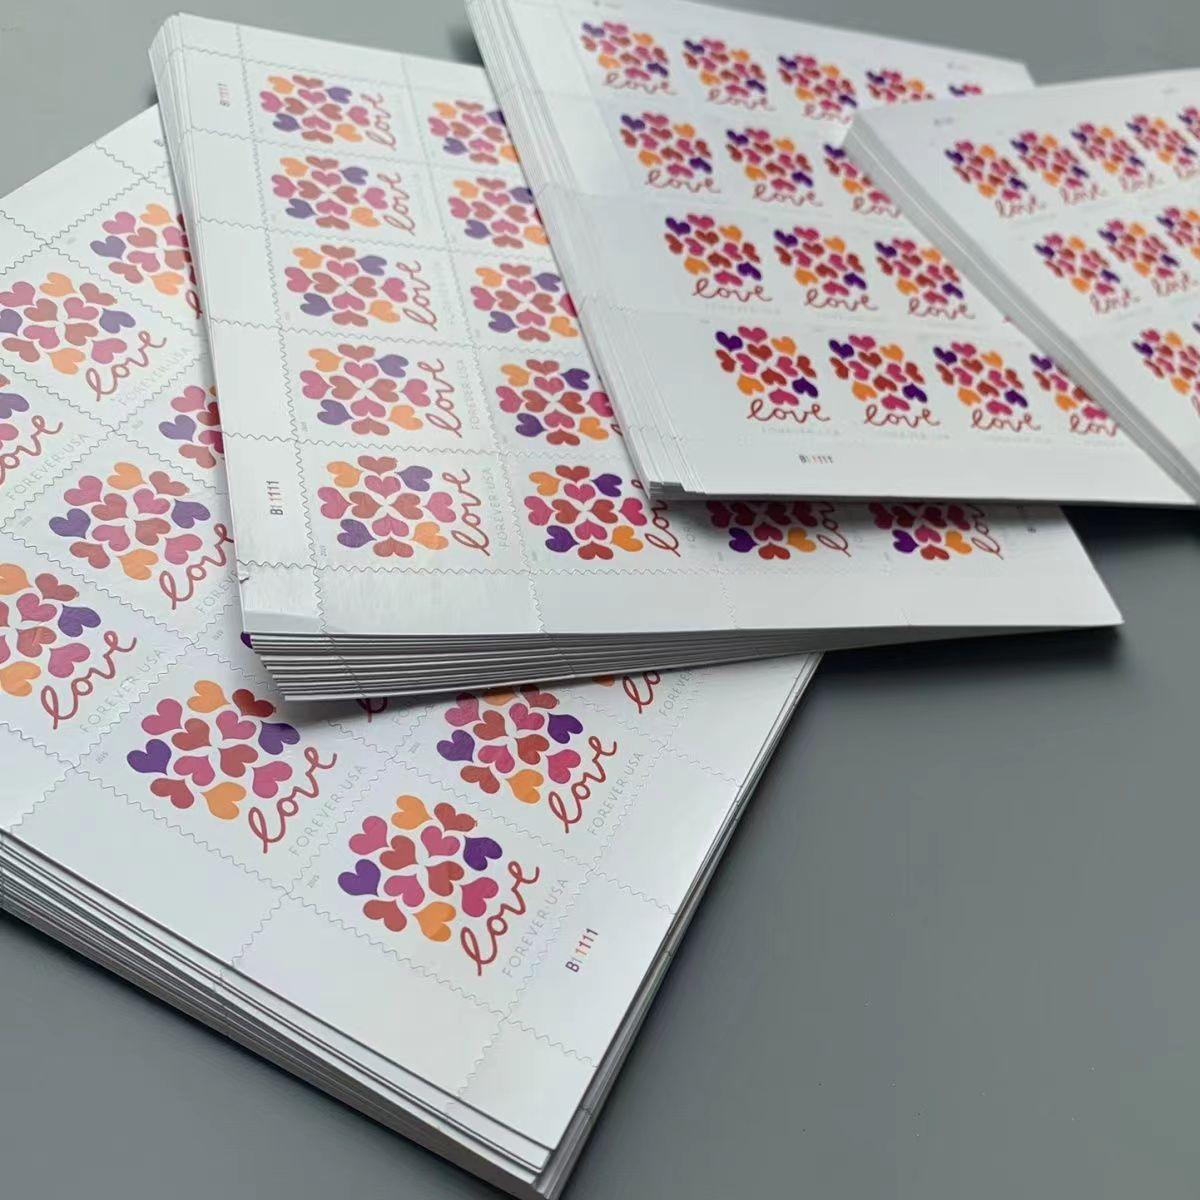 Five sheets of Hearts Blossom Love 2019 - 5 Sheets / 100 Pcs postage stamps; each sheet features multiple "Hearts Blossom Love" stamps with heart designs, arranged on a table.